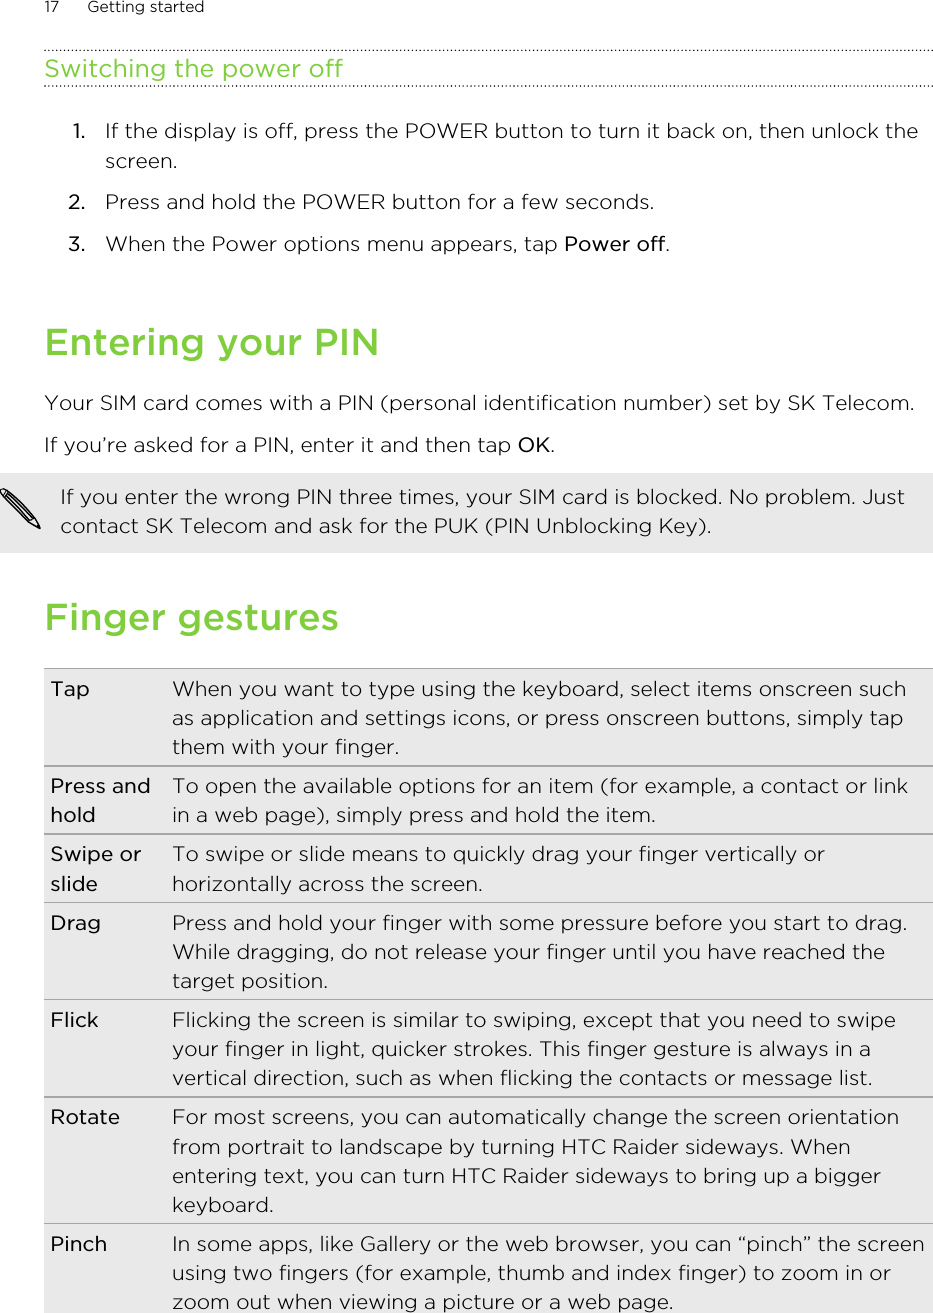 Switching the power off1. If the display is off, press the POWER button to turn it back on, then unlock thescreen.2. Press and hold the POWER button for a few seconds.3. When the Power options menu appears, tap Power off.Entering your PINYour SIM card comes with a PIN (personal identification number) set by SK Telecom.If you’re asked for a PIN, enter it and then tap OK. If you enter the wrong PIN three times, your SIM card is blocked. No problem. Justcontact SK Telecom and ask for the PUK (PIN Unblocking Key).Finger gesturesTap When you want to type using the keyboard, select items onscreen suchas application and settings icons, or press onscreen buttons, simply tapthem with your finger.Press andholdTo open the available options for an item (for example, a contact or linkin a web page), simply press and hold the item.Swipe orslideTo swipe or slide means to quickly drag your finger vertically orhorizontally across the screen.Drag Press and hold your finger with some pressure before you start to drag.While dragging, do not release your finger until you have reached thetarget position.Flick Flicking the screen is similar to swiping, except that you need to swipeyour finger in light, quicker strokes. This finger gesture is always in avertical direction, such as when flicking the contacts or message list.Rotate For most screens, you can automatically change the screen orientationfrom portrait to landscape by turning HTC Raider sideways. Whenentering text, you can turn HTC Raider sideways to bring up a biggerkeyboard.Pinch In some apps, like Gallery or the web browser, you can “pinch” the screenusing two fingers (for example, thumb and index finger) to zoom in orzoom out when viewing a picture or a web page.17 Getting started